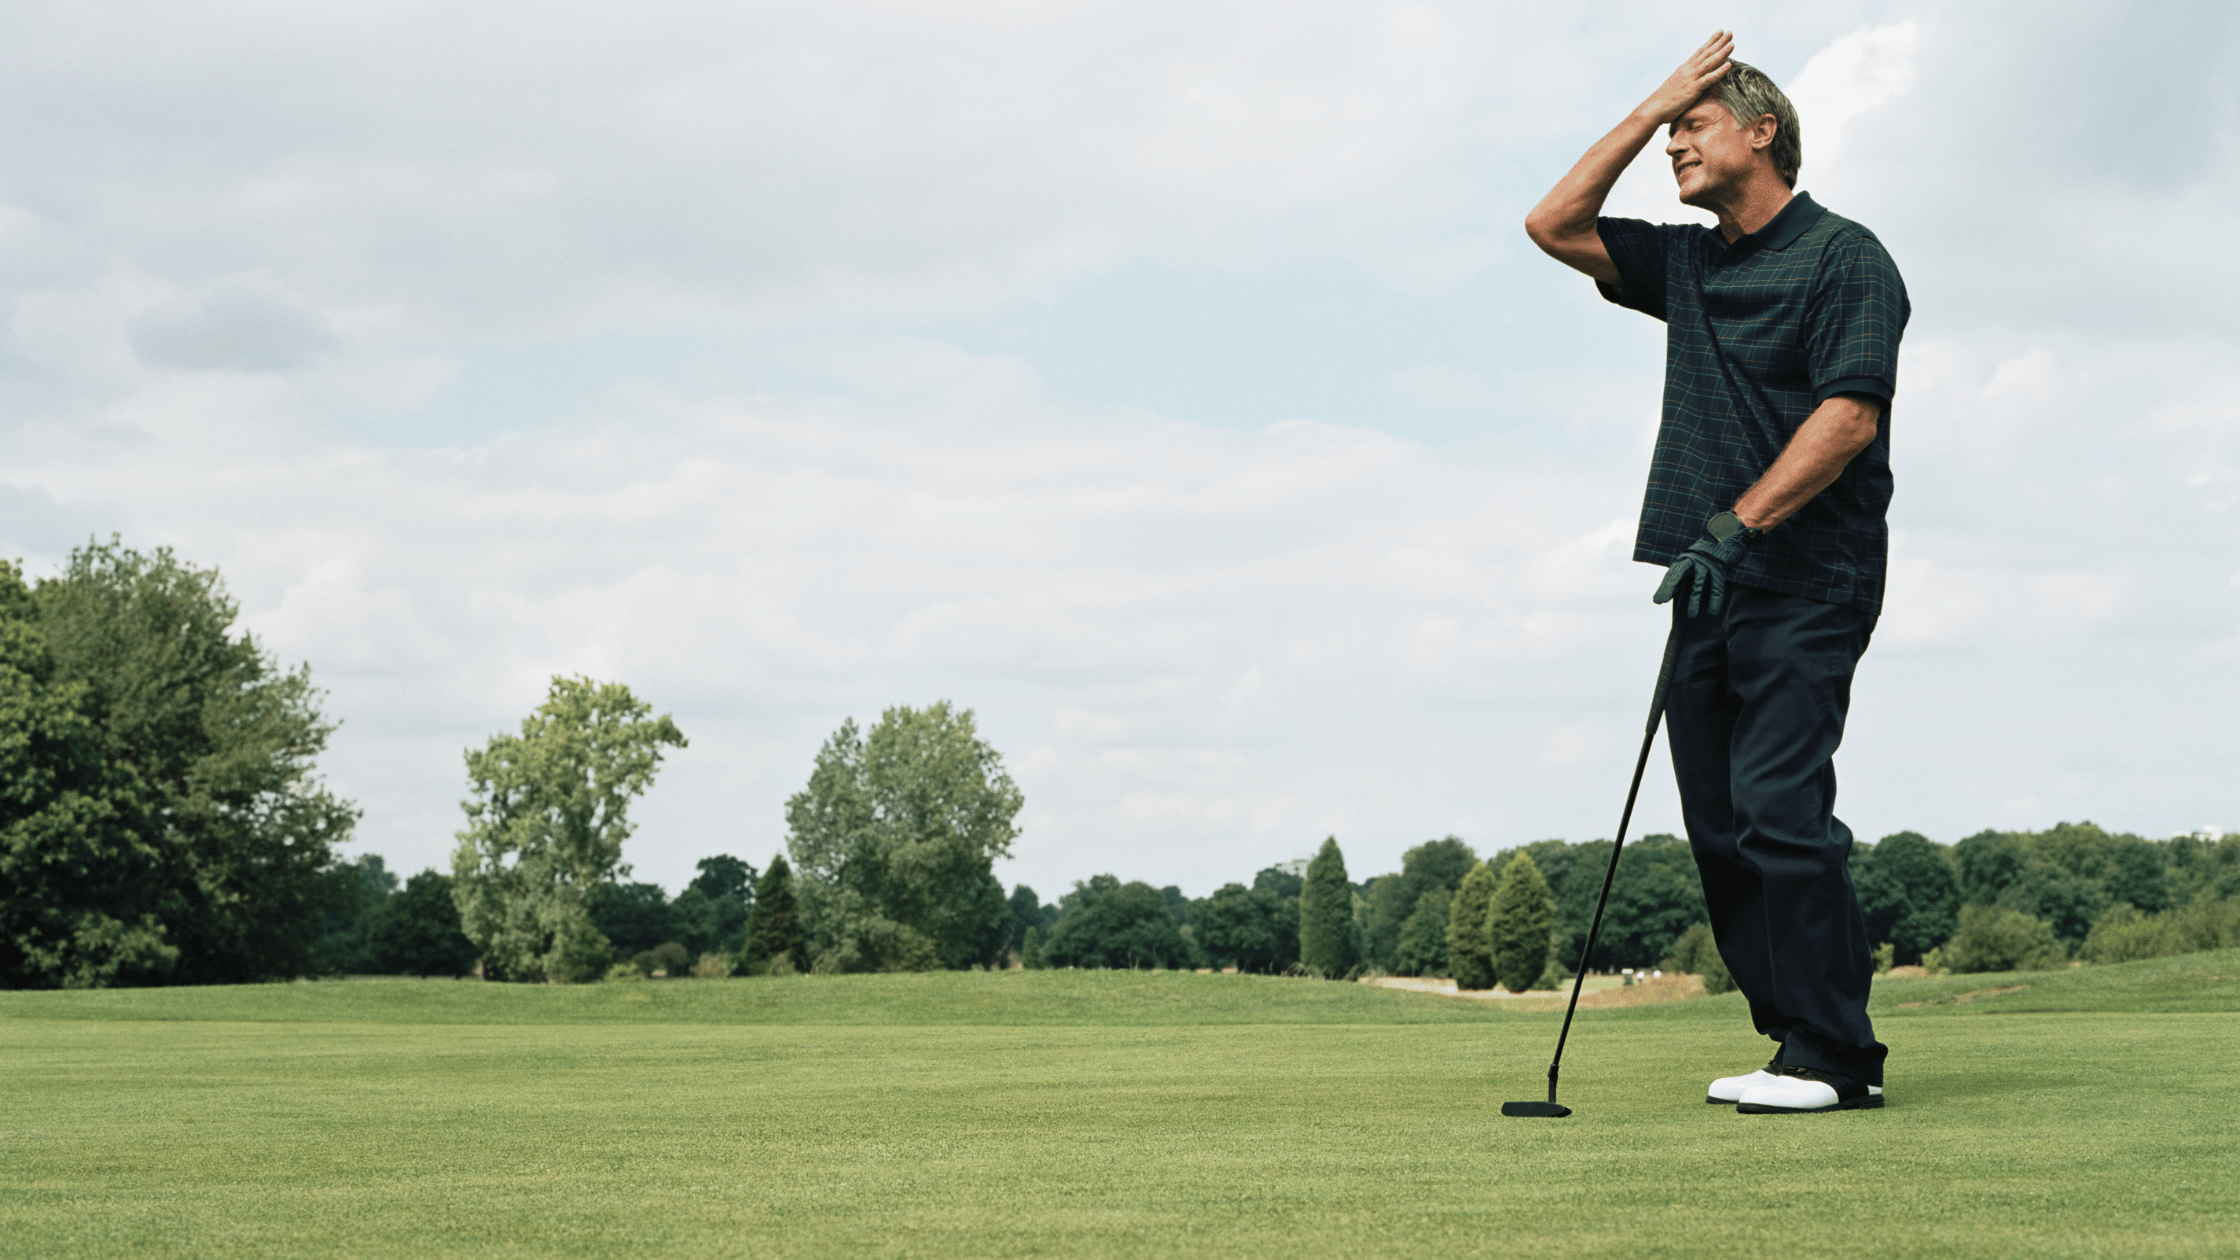 Why Your Golf Score May Not Be Improving and How to Change That